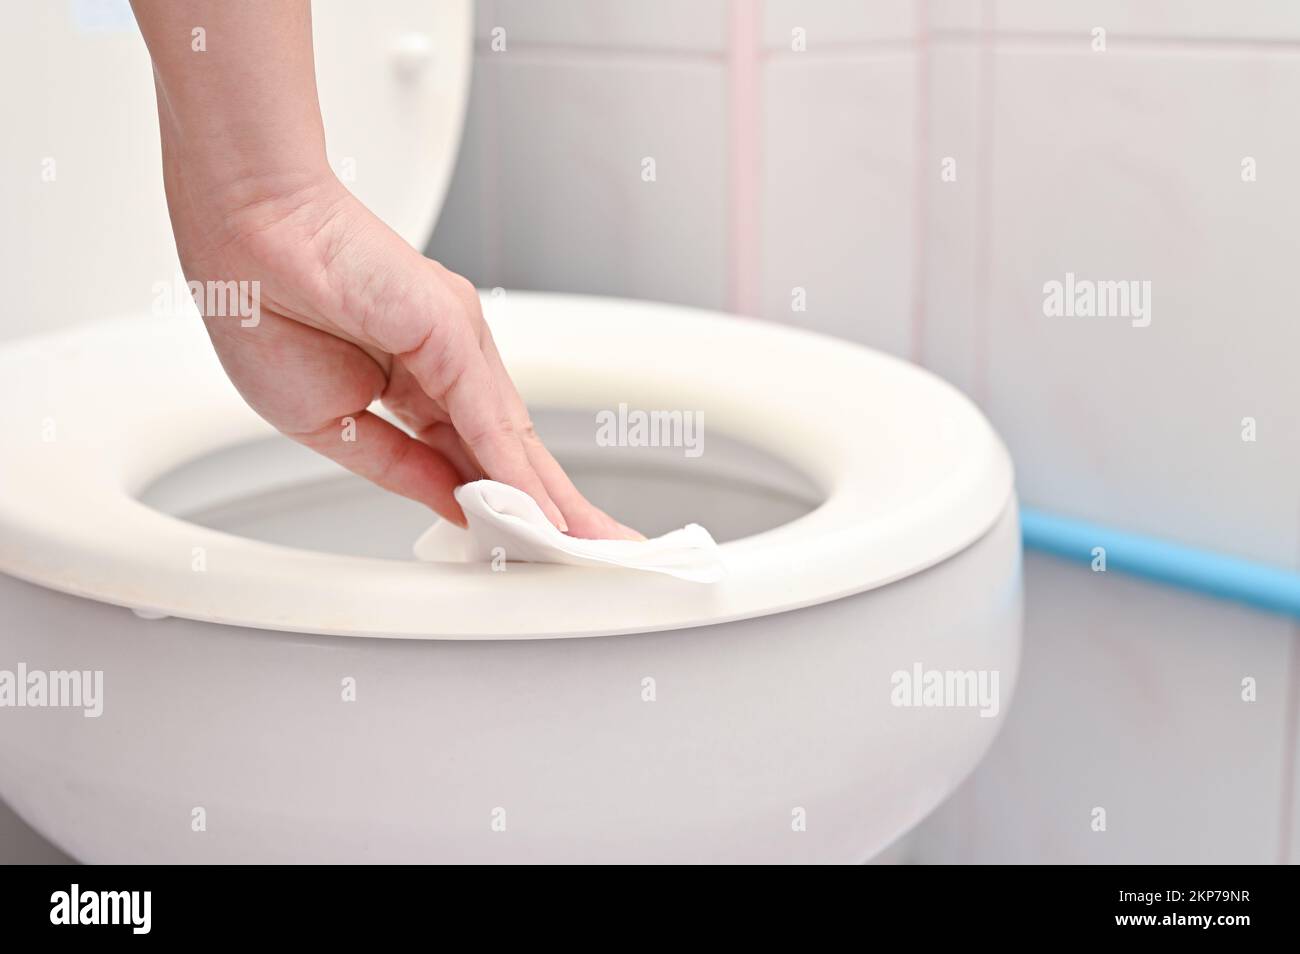 A closeup of a woman's hand cleaning the toilet seat with a wet wipe Stock Photo